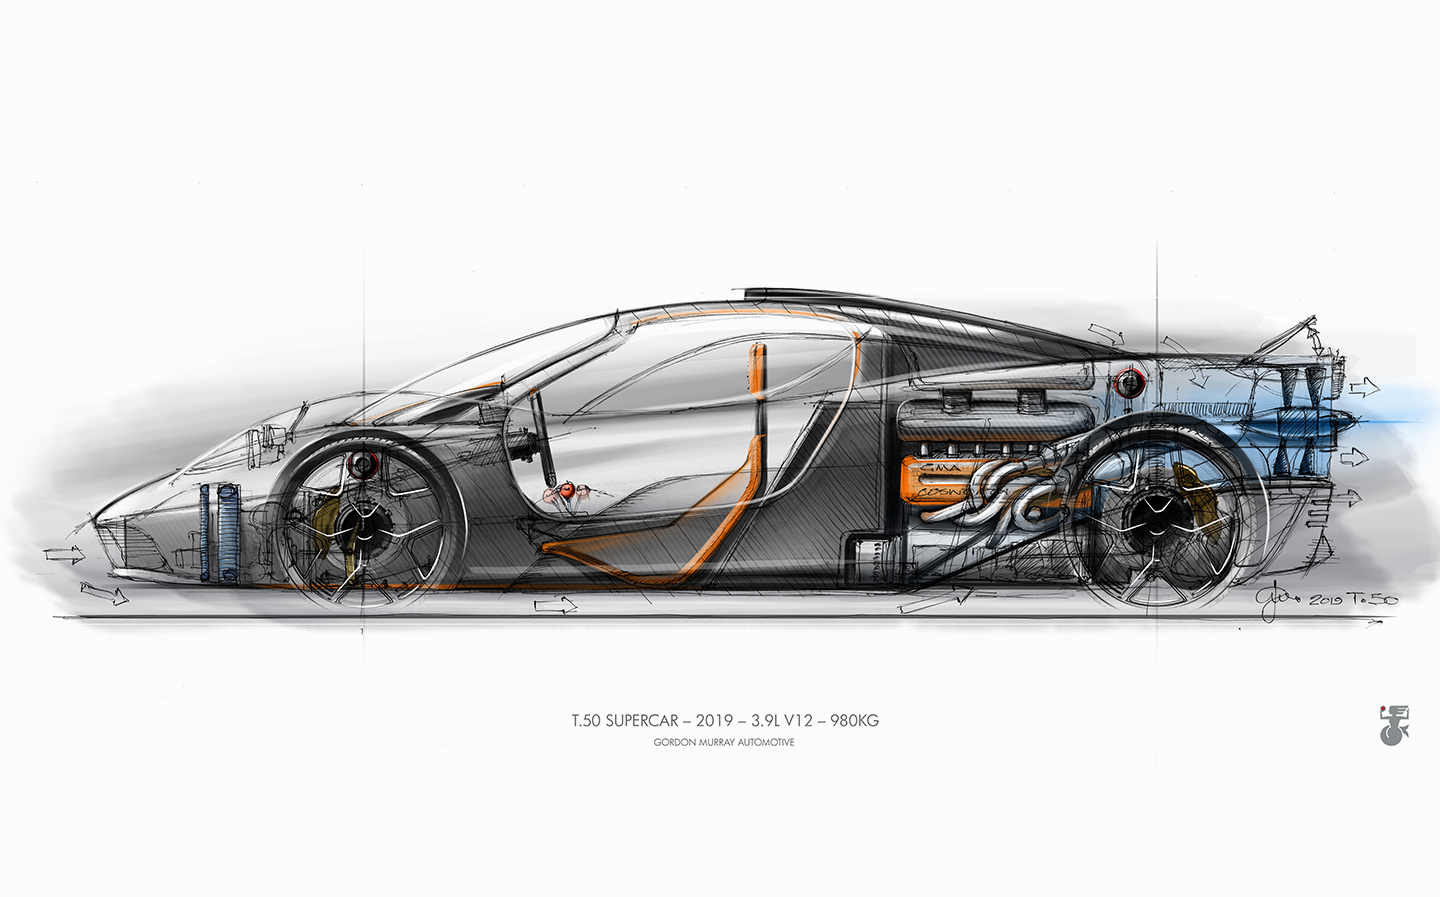 Gordon Murray’s new V12 supercar will be lighter, rev higher than Aston Valkyrie and have Brabham 'Fan Car' tech